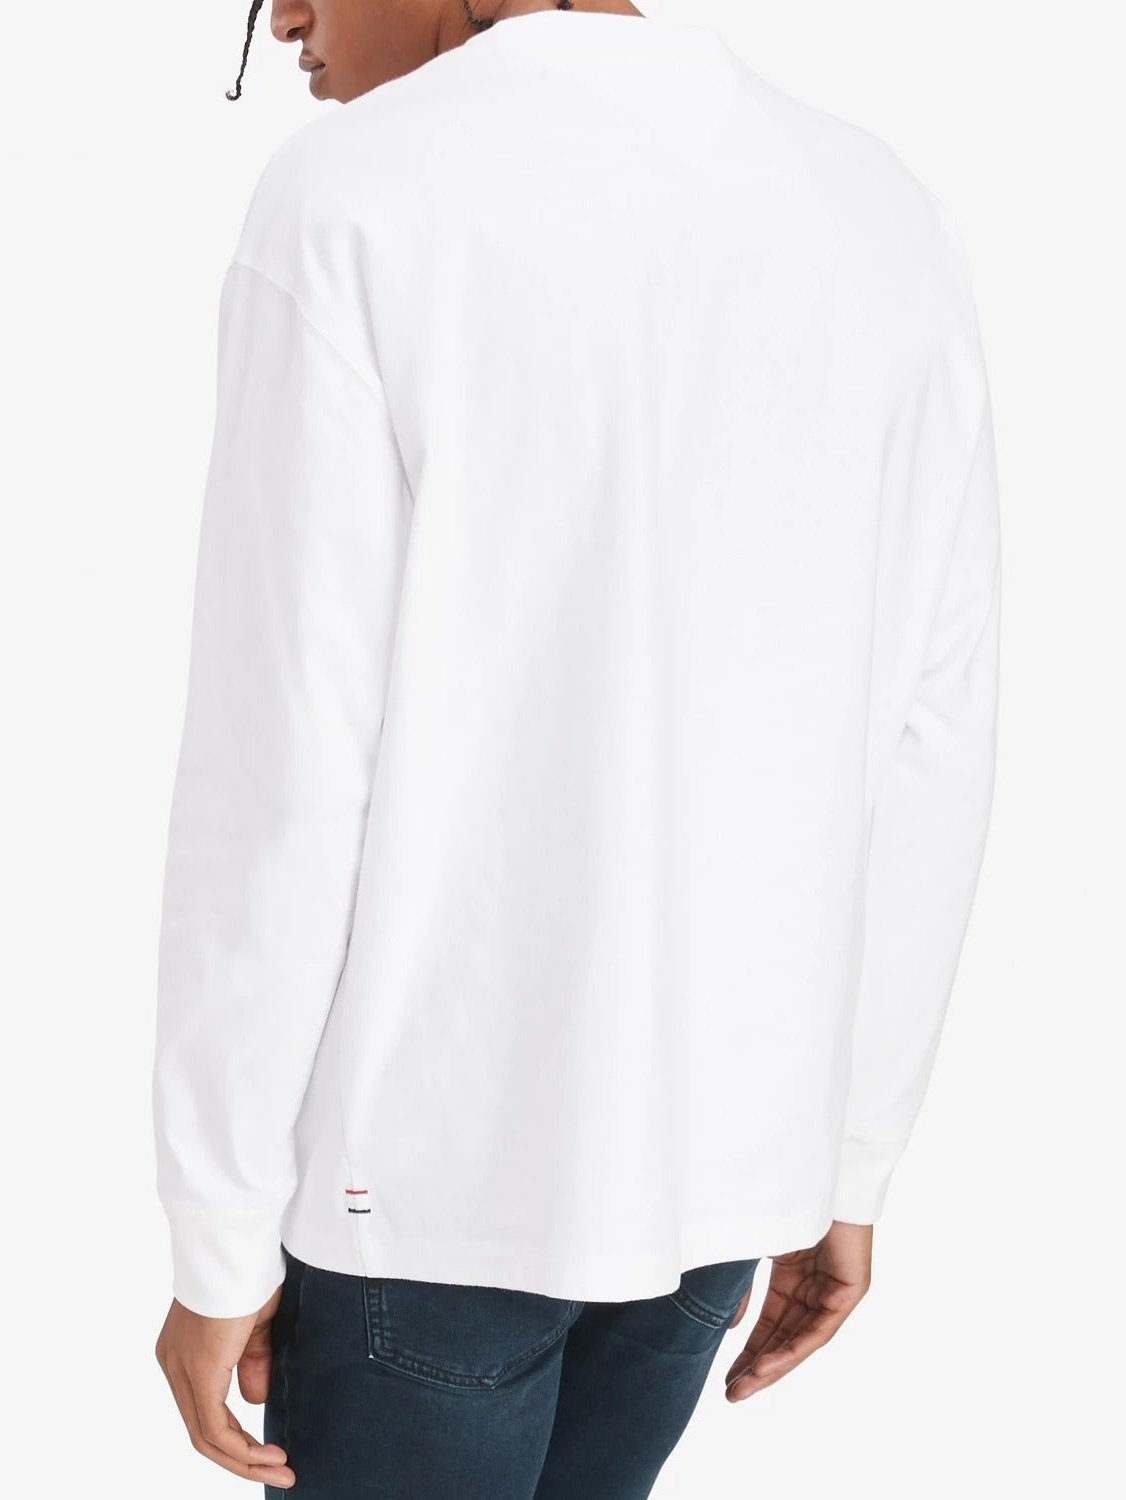 Tommy Hilfiger Mens Tommy Jeans Albie Badge Long Sleeve T-Shirt Bright White 78J3708 110.